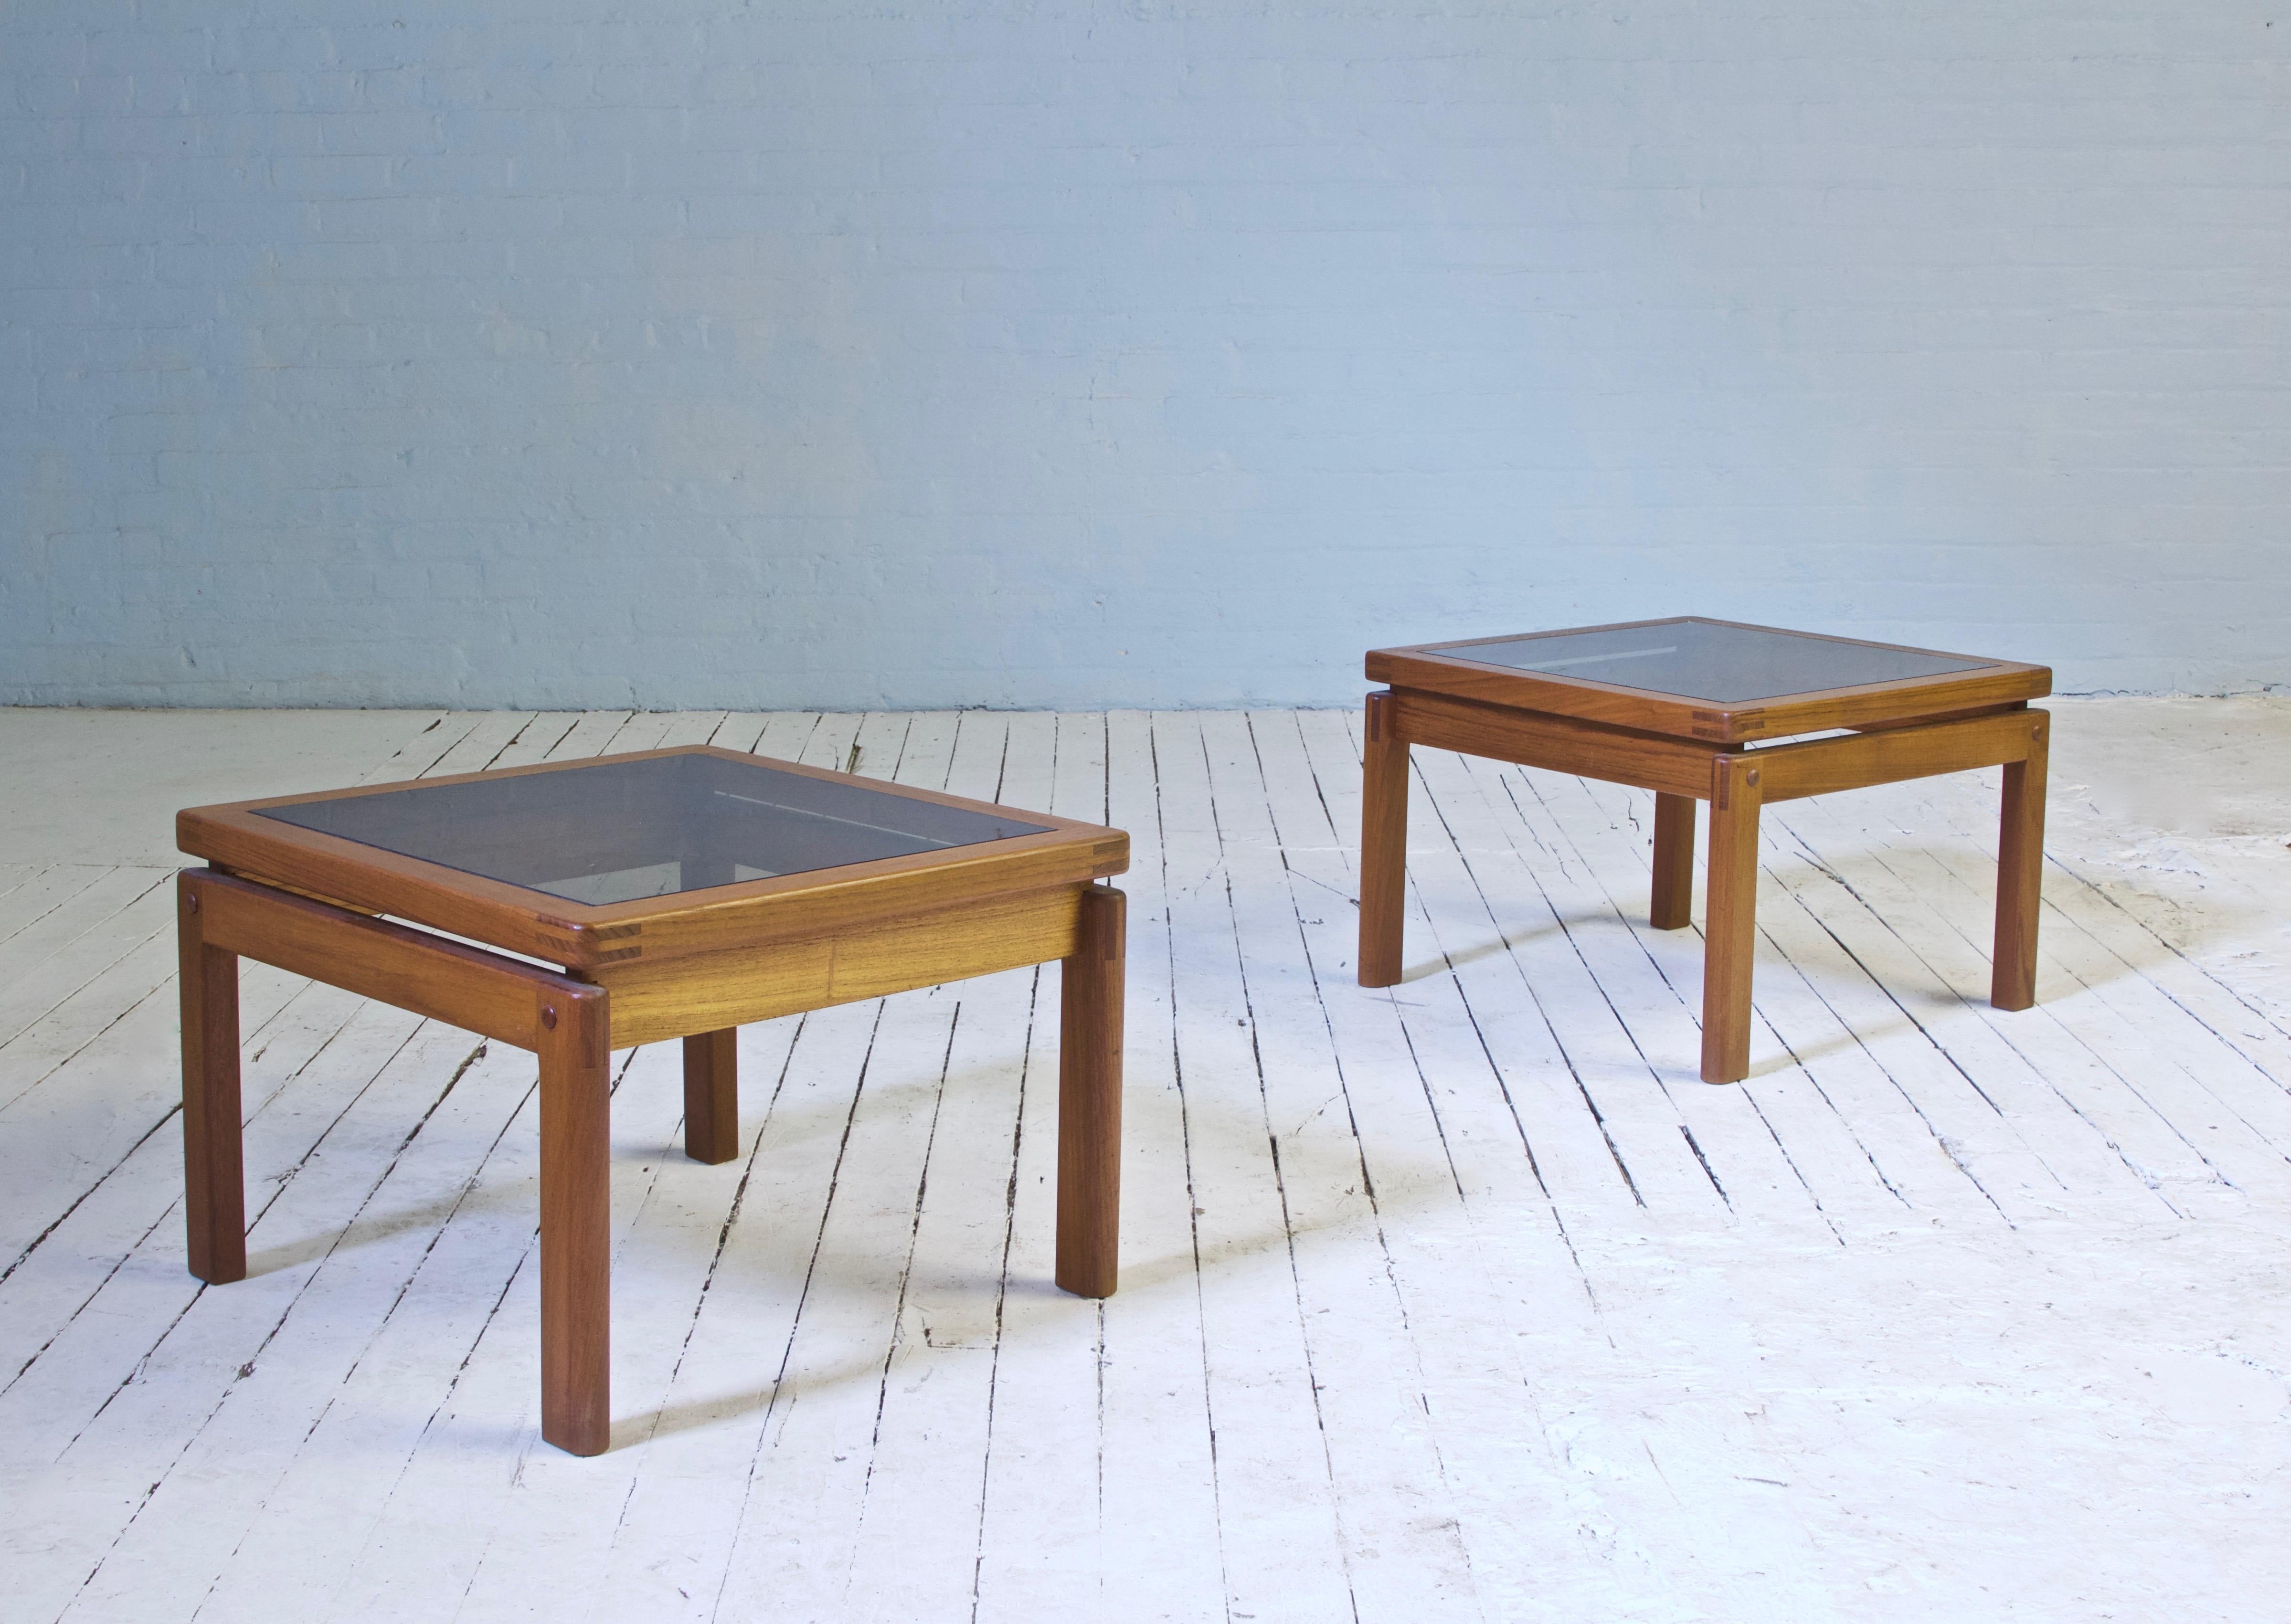 Mid-20th Century Vintage Pair of Signed Danish Side Tables with Exposed Joinery in Teak, 1960s For Sale